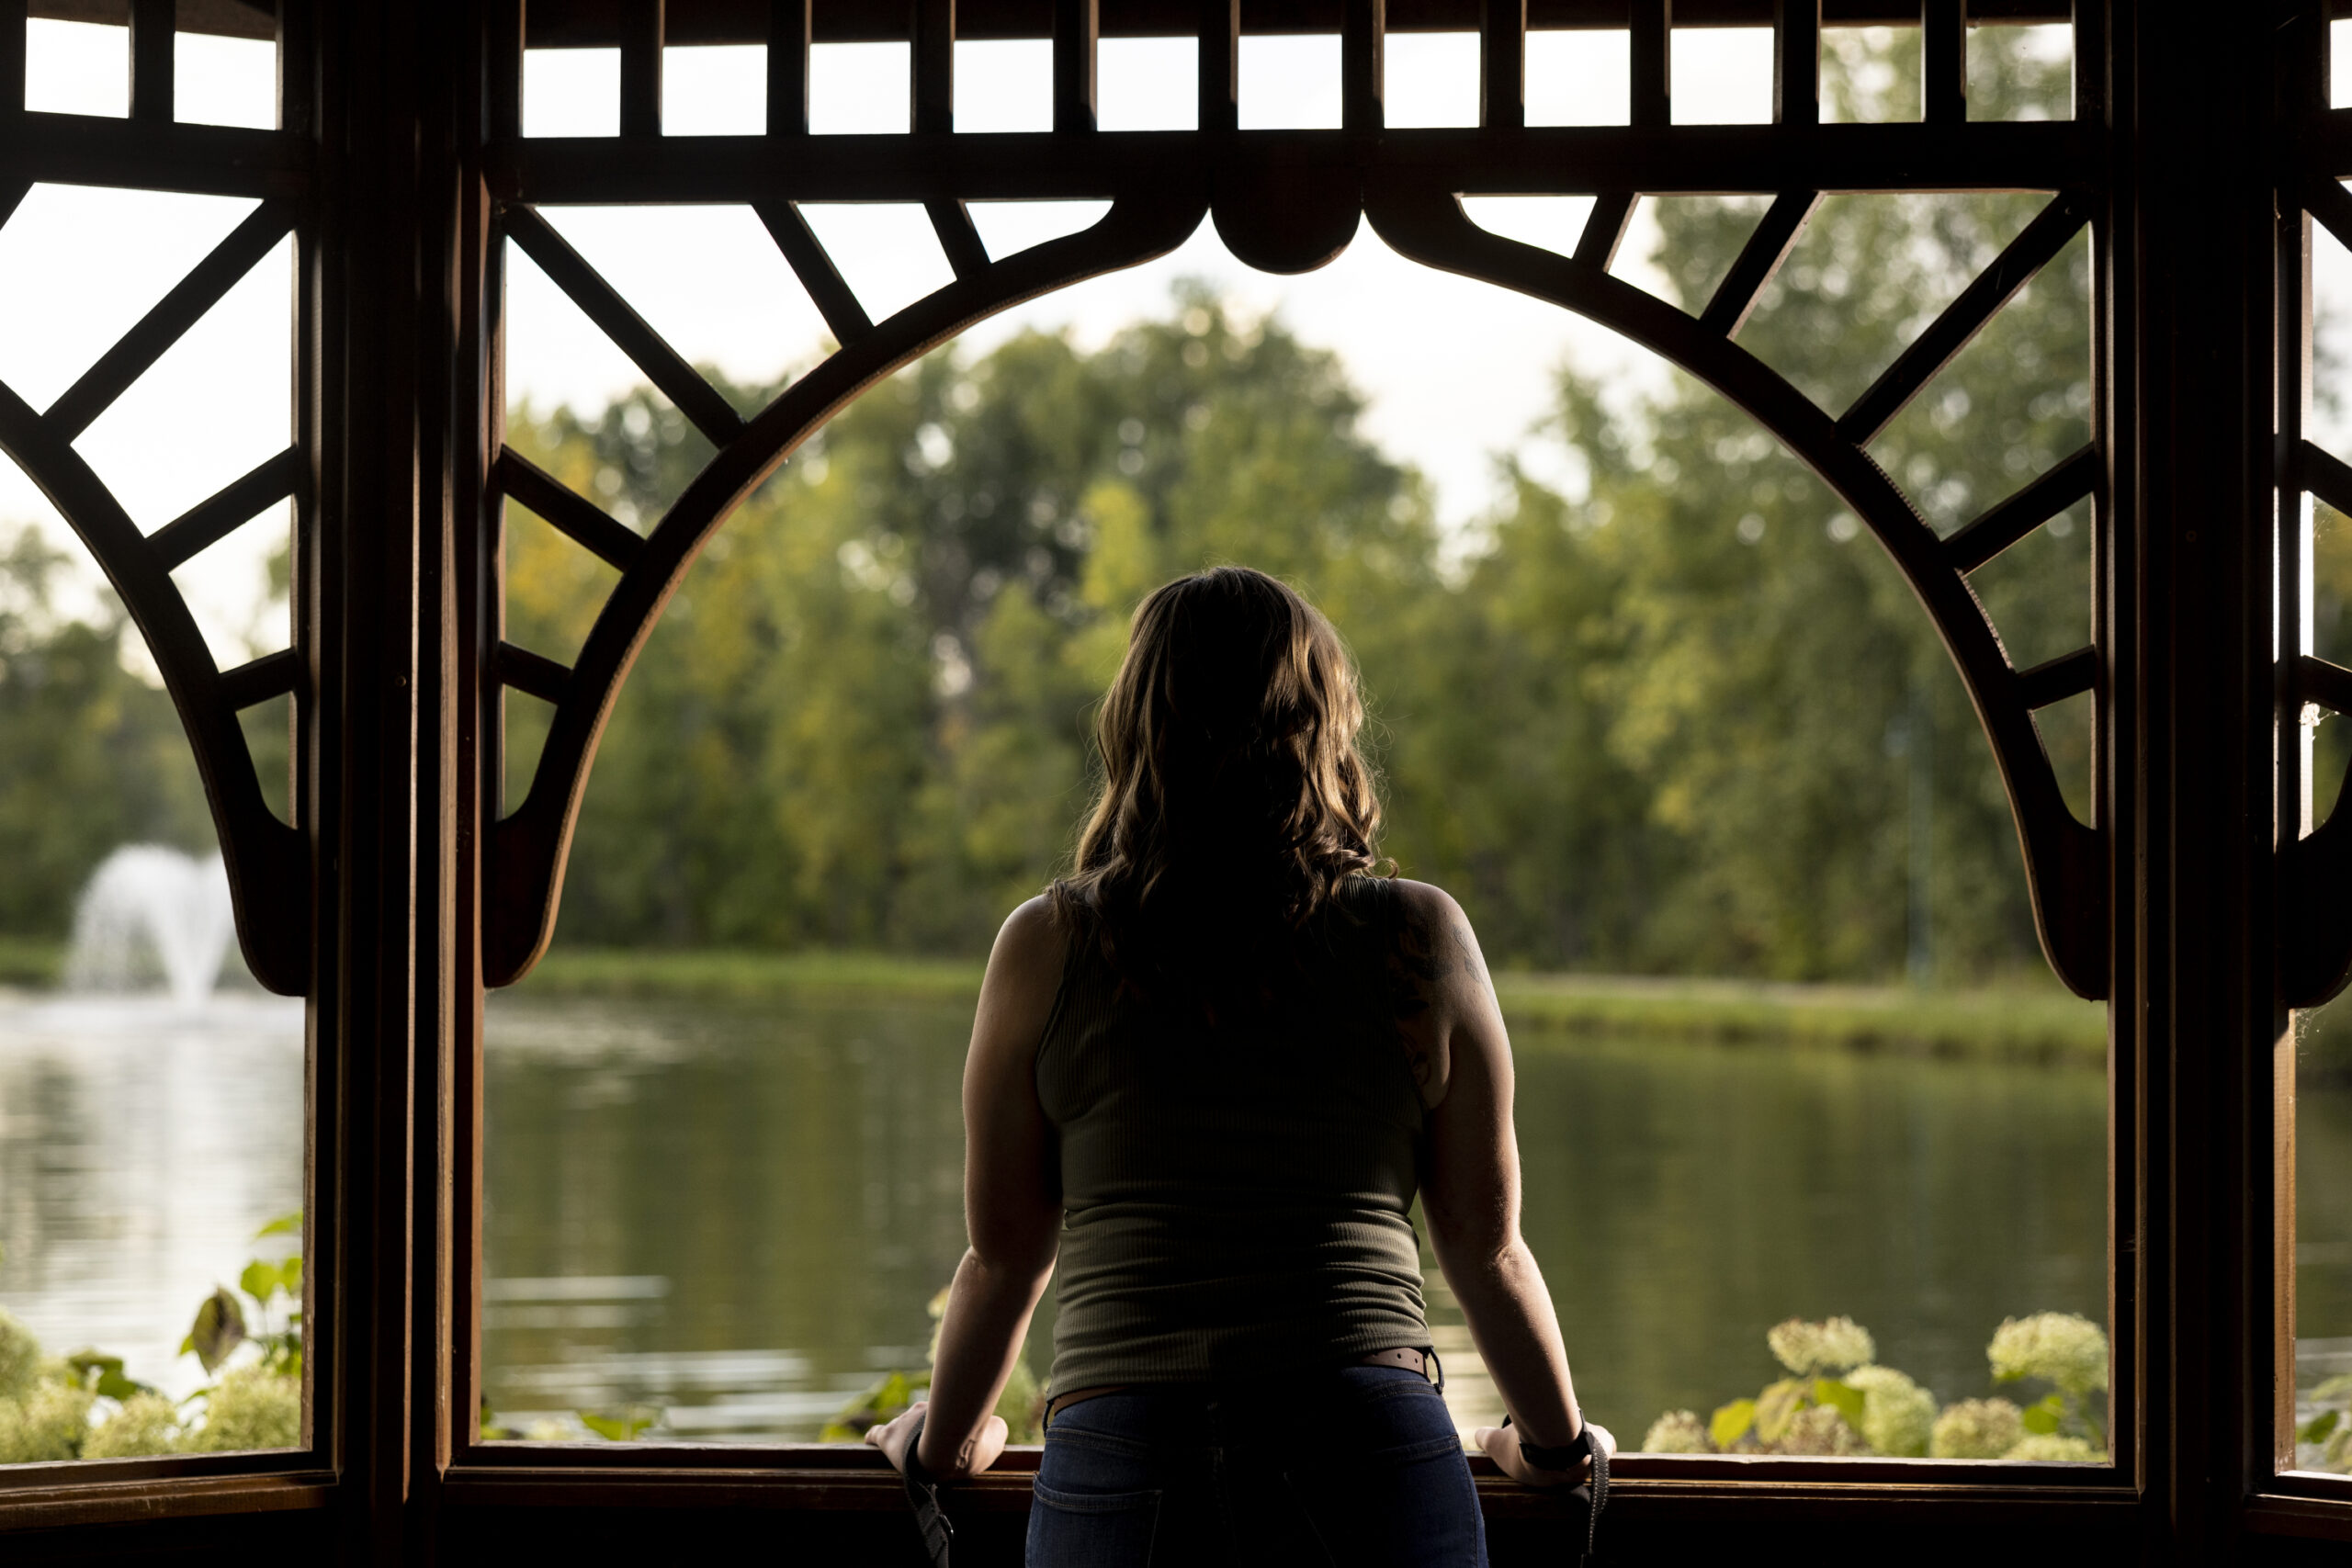 A woman stands with her back to the camera, in a gazebo, facing a body of water